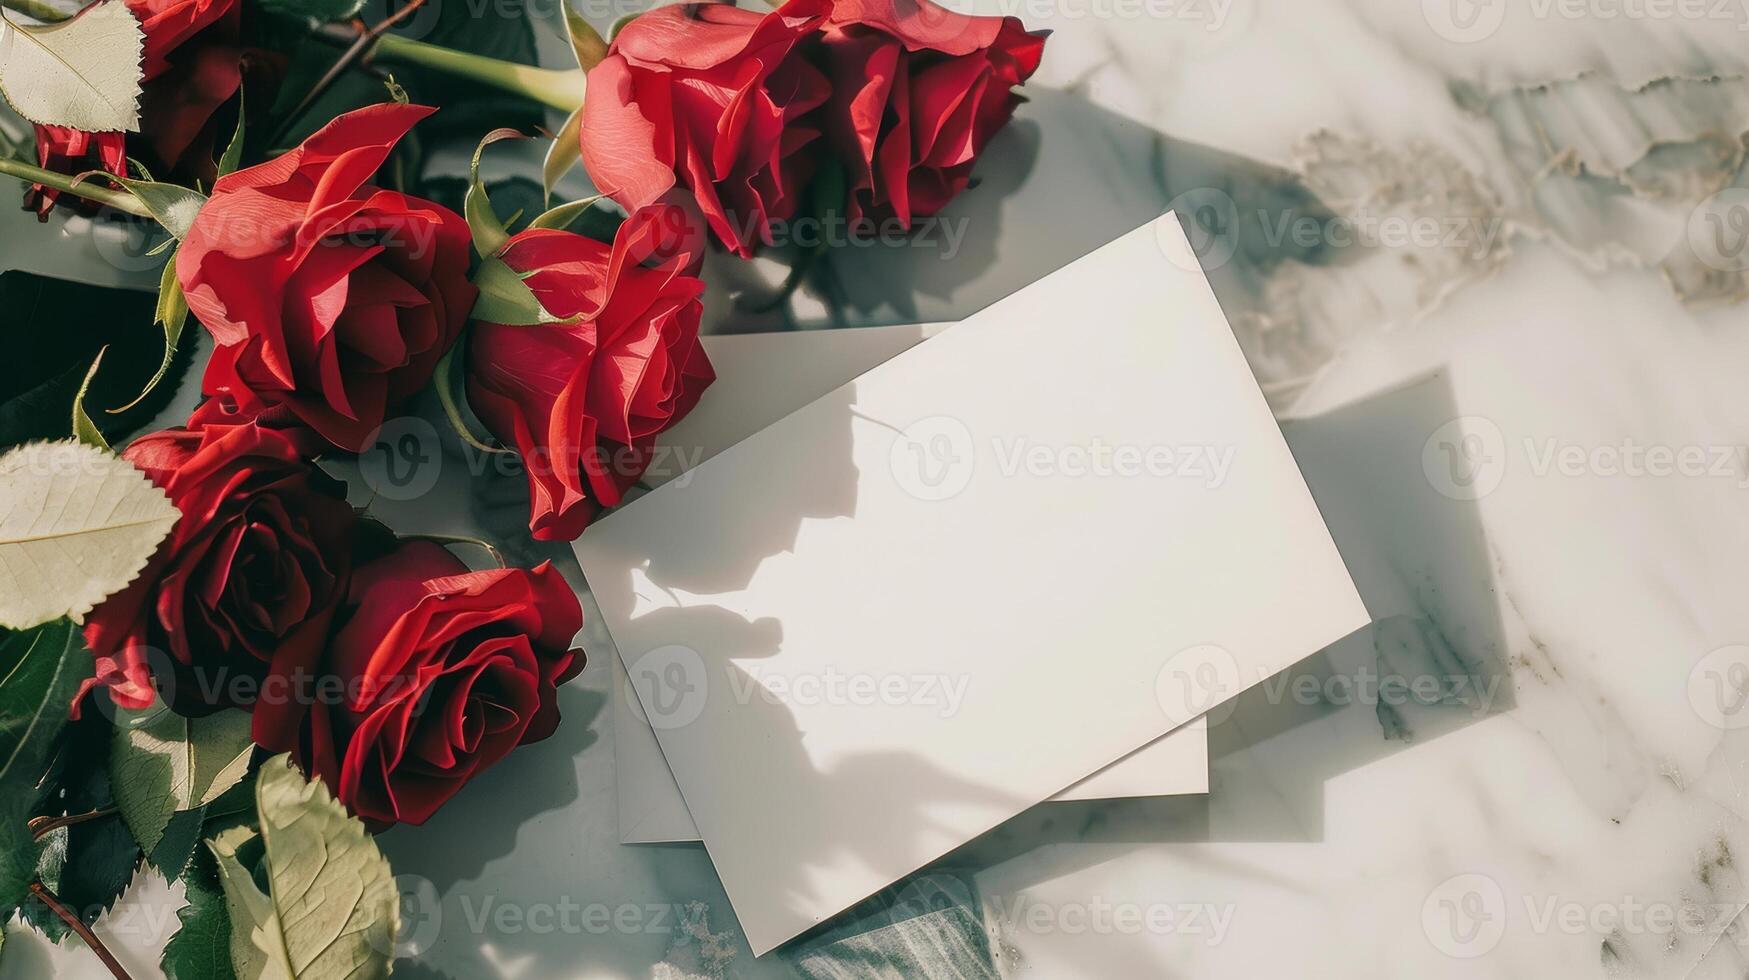 mockup of a white card beside red rose bouquet, soft pastel tones photo